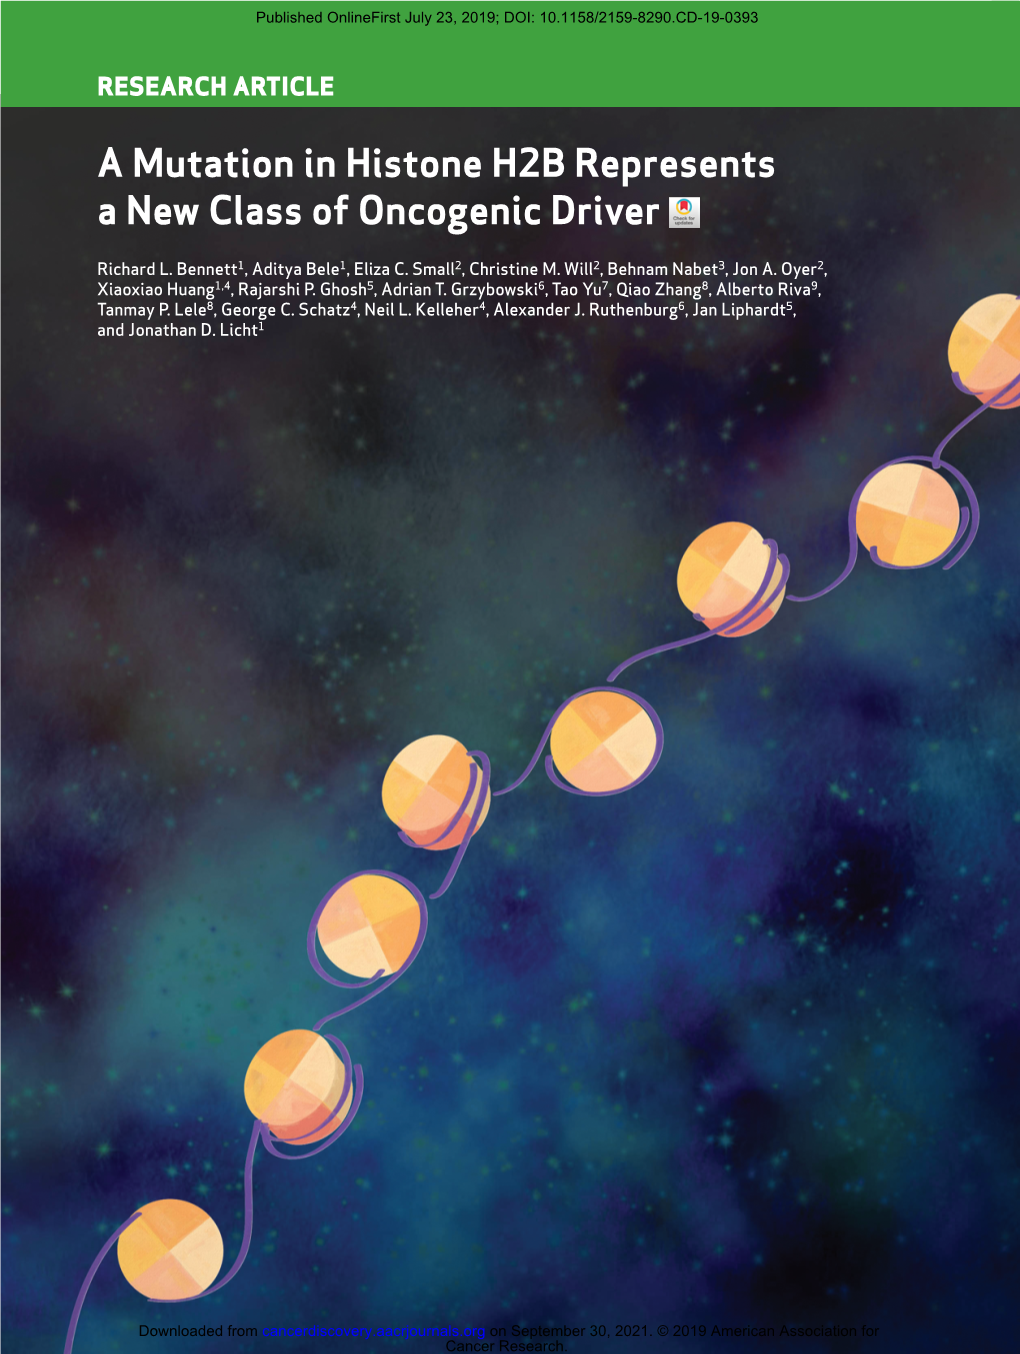 A Mutation in Histone H2B Represents a New Class of Oncogenic Driver